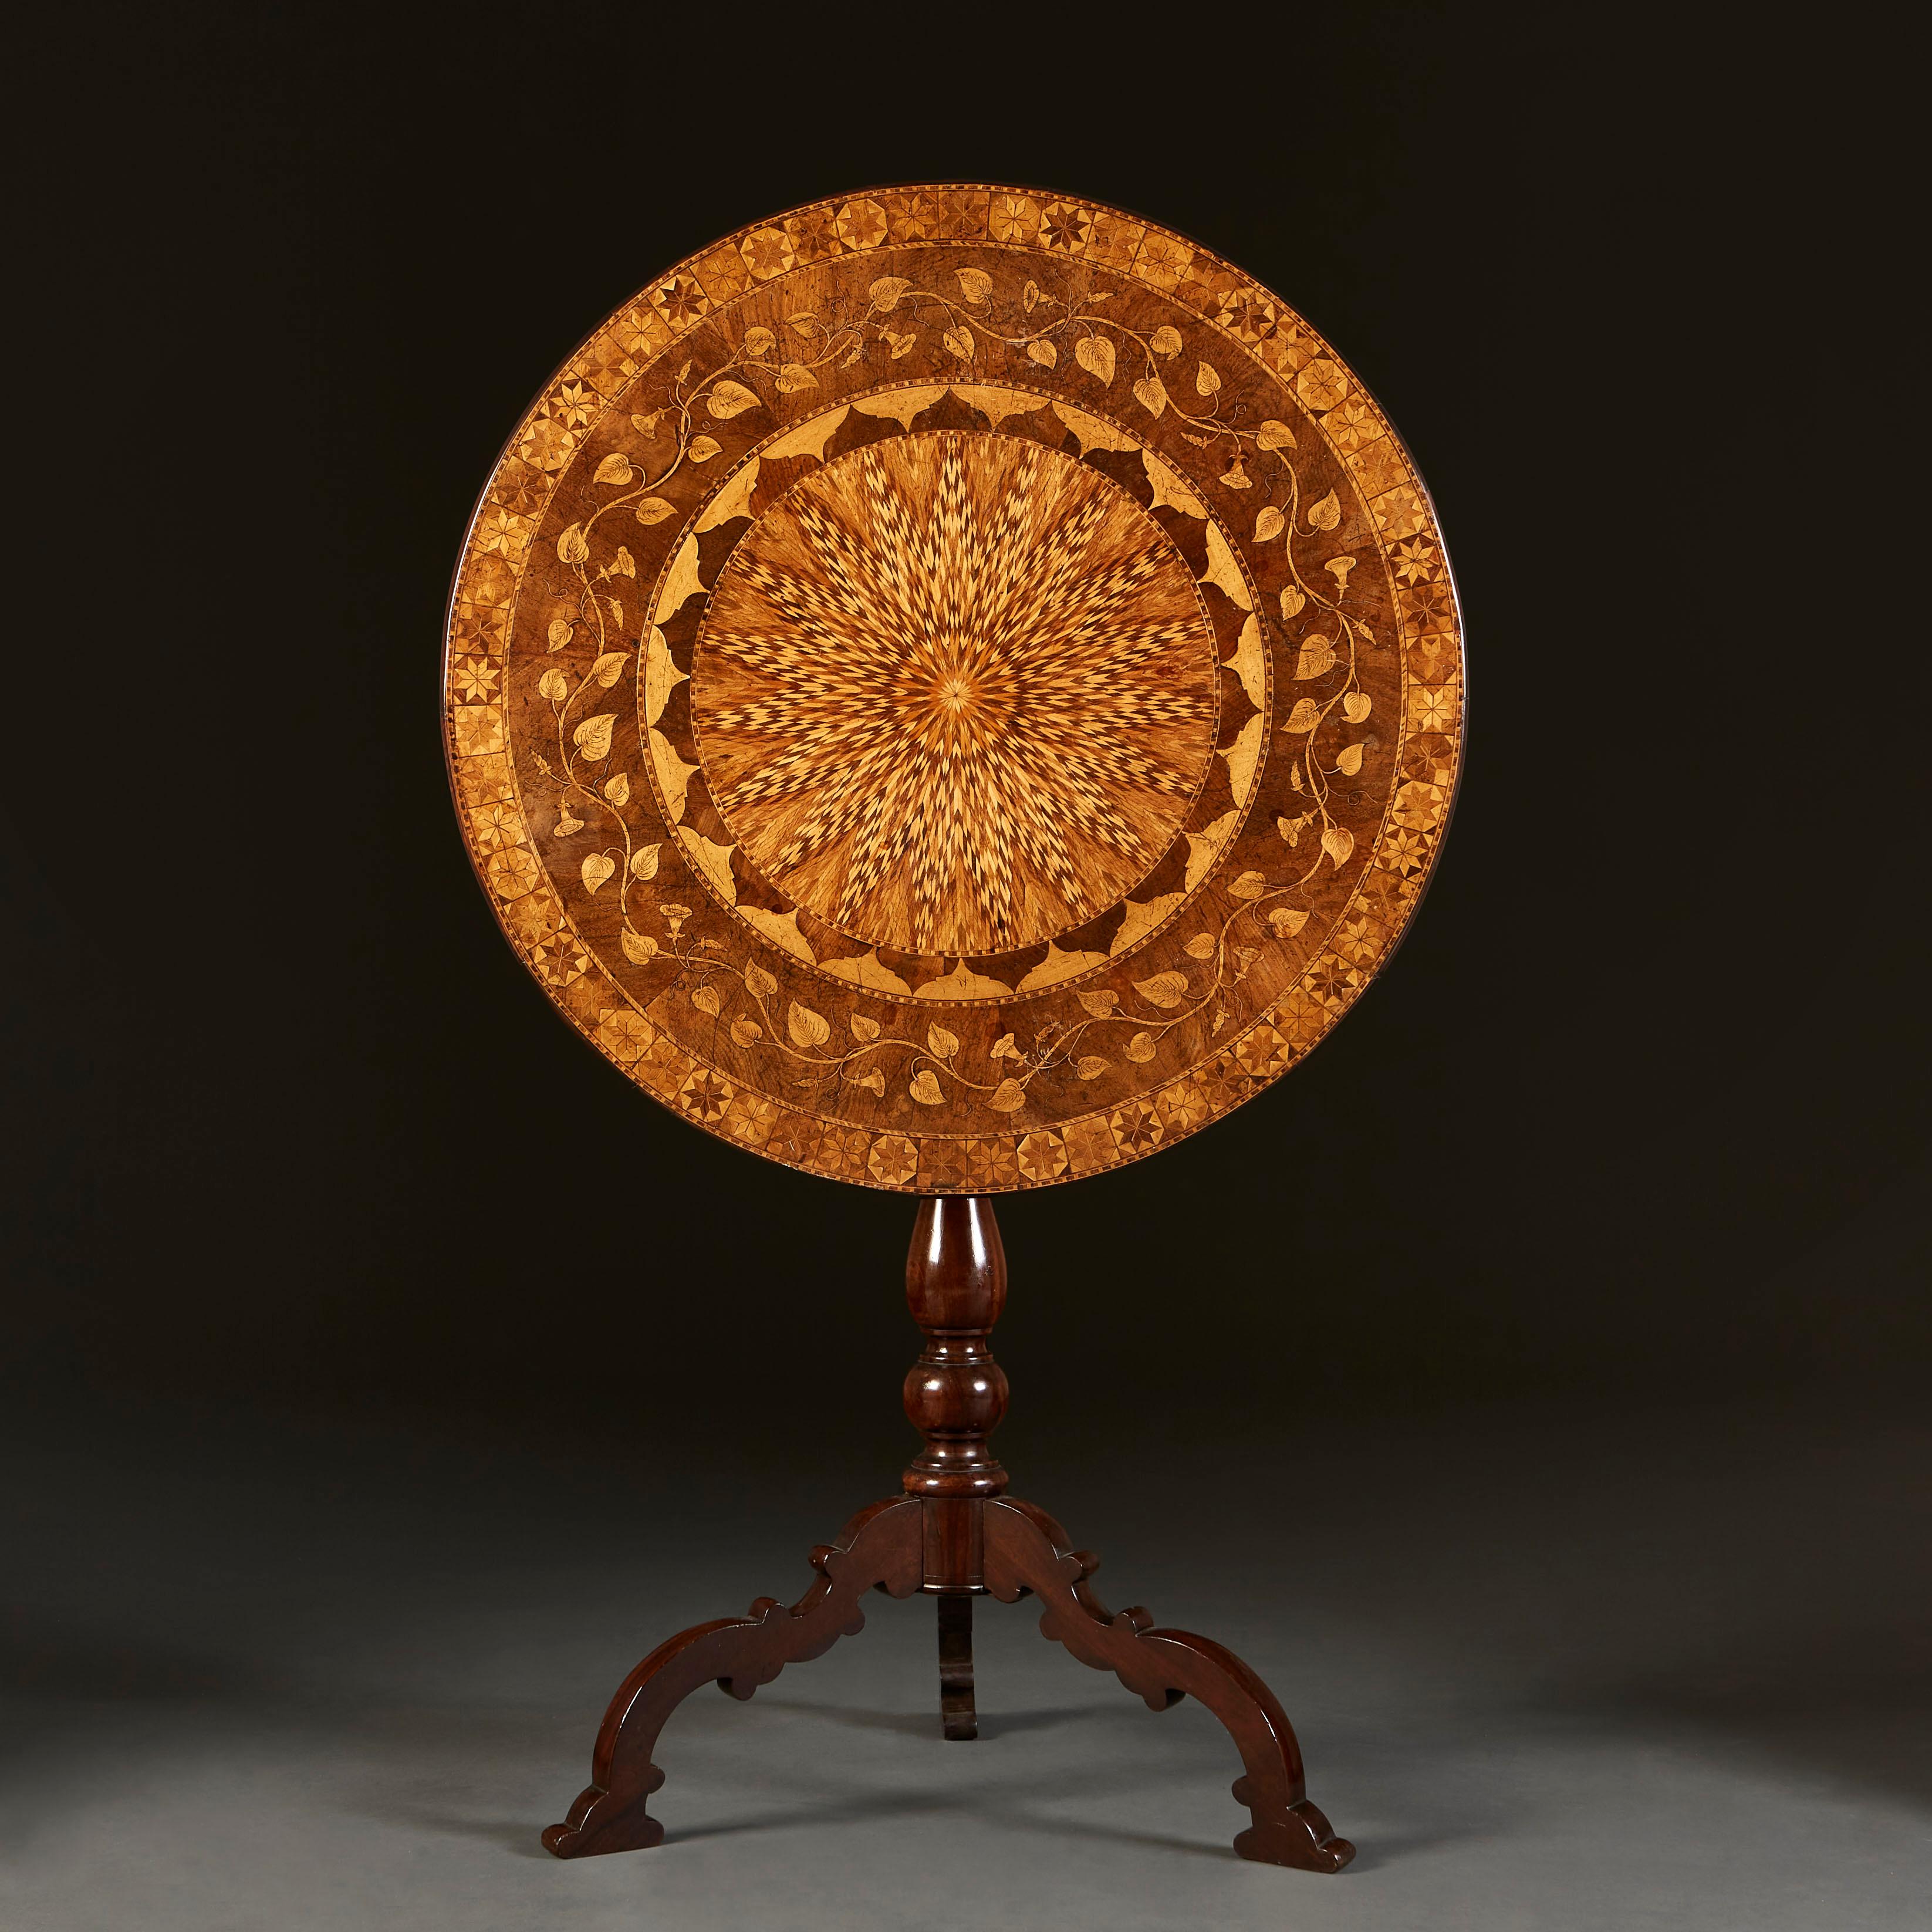 An early nineteenth century marquetry table, with a variety of exotic woods inlaid to create a central medallion design, circled by an intertwining vine border, in turn bordered by a variegated star motif. The table top tilts to reveal a hidden